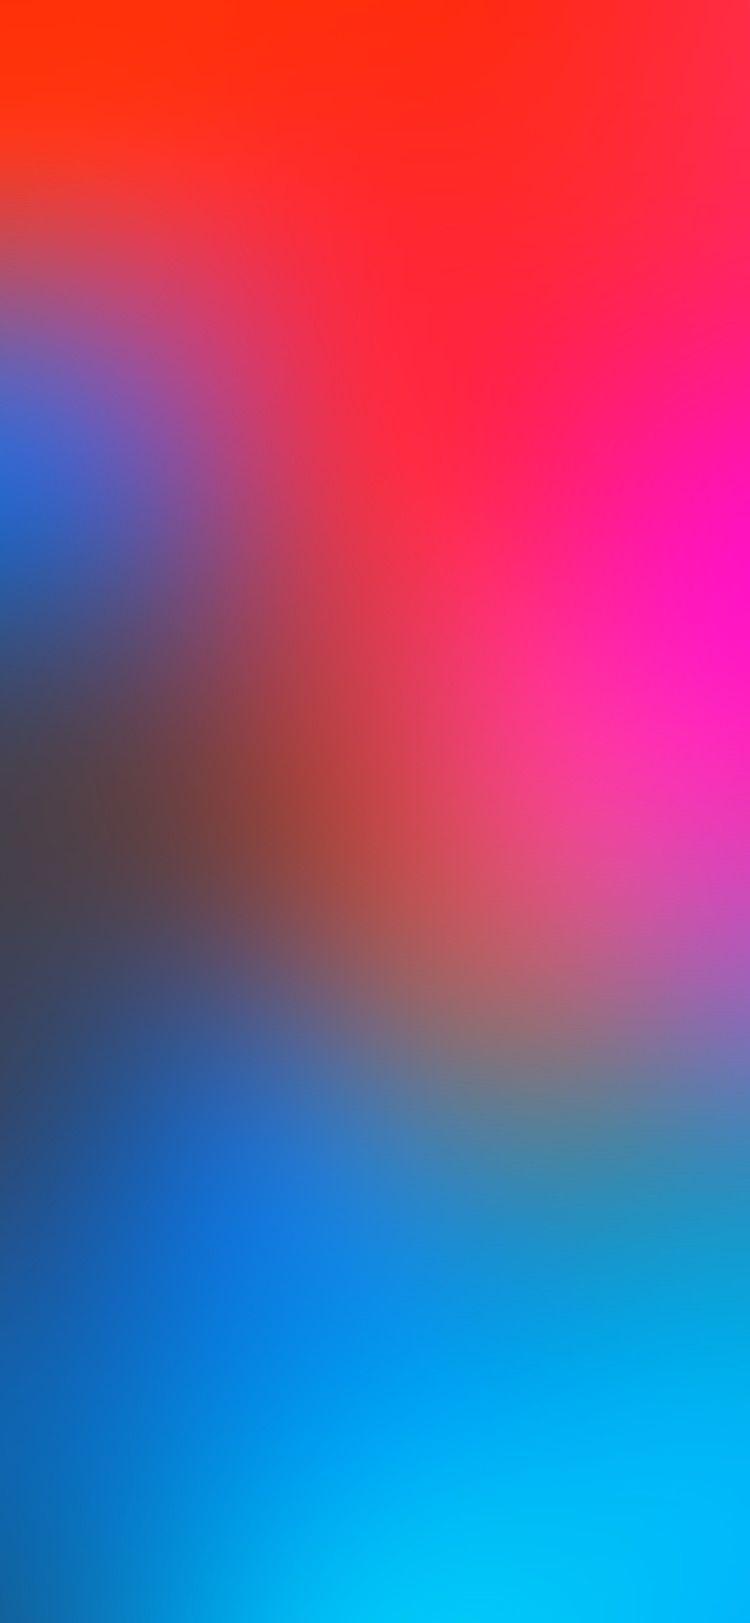 Blurry iPhone Wallpapers - Top Free Blurry iPhone Backgrounds ...